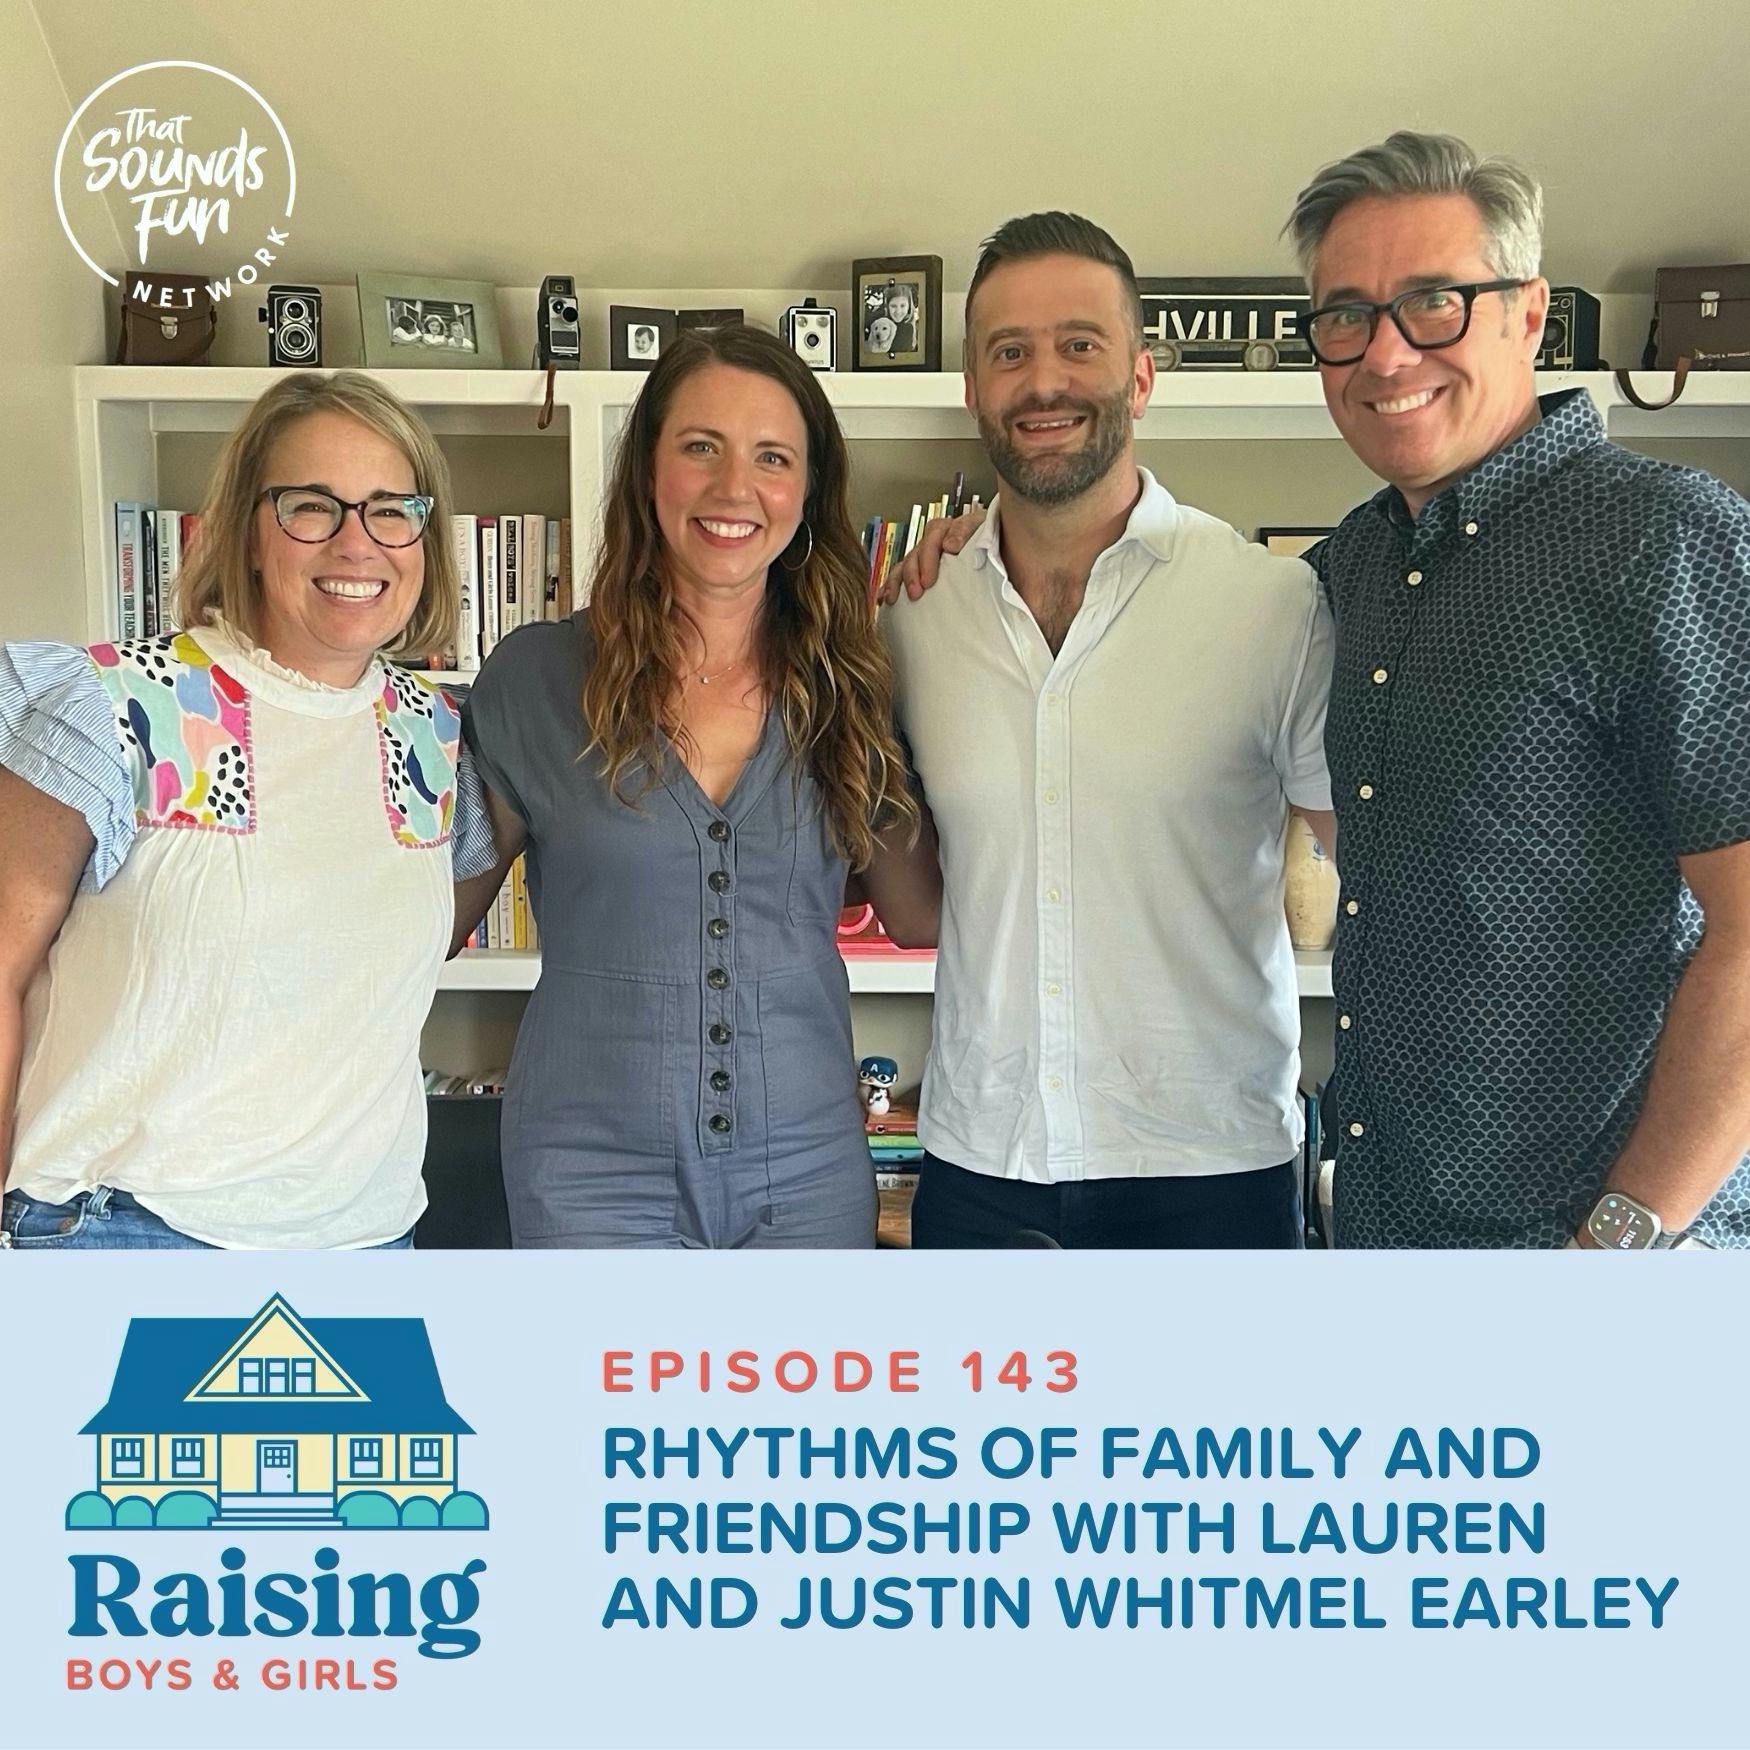 Episode 143: Rhythms of Family and Friendship with Lauren and Justin Whitmel Earley